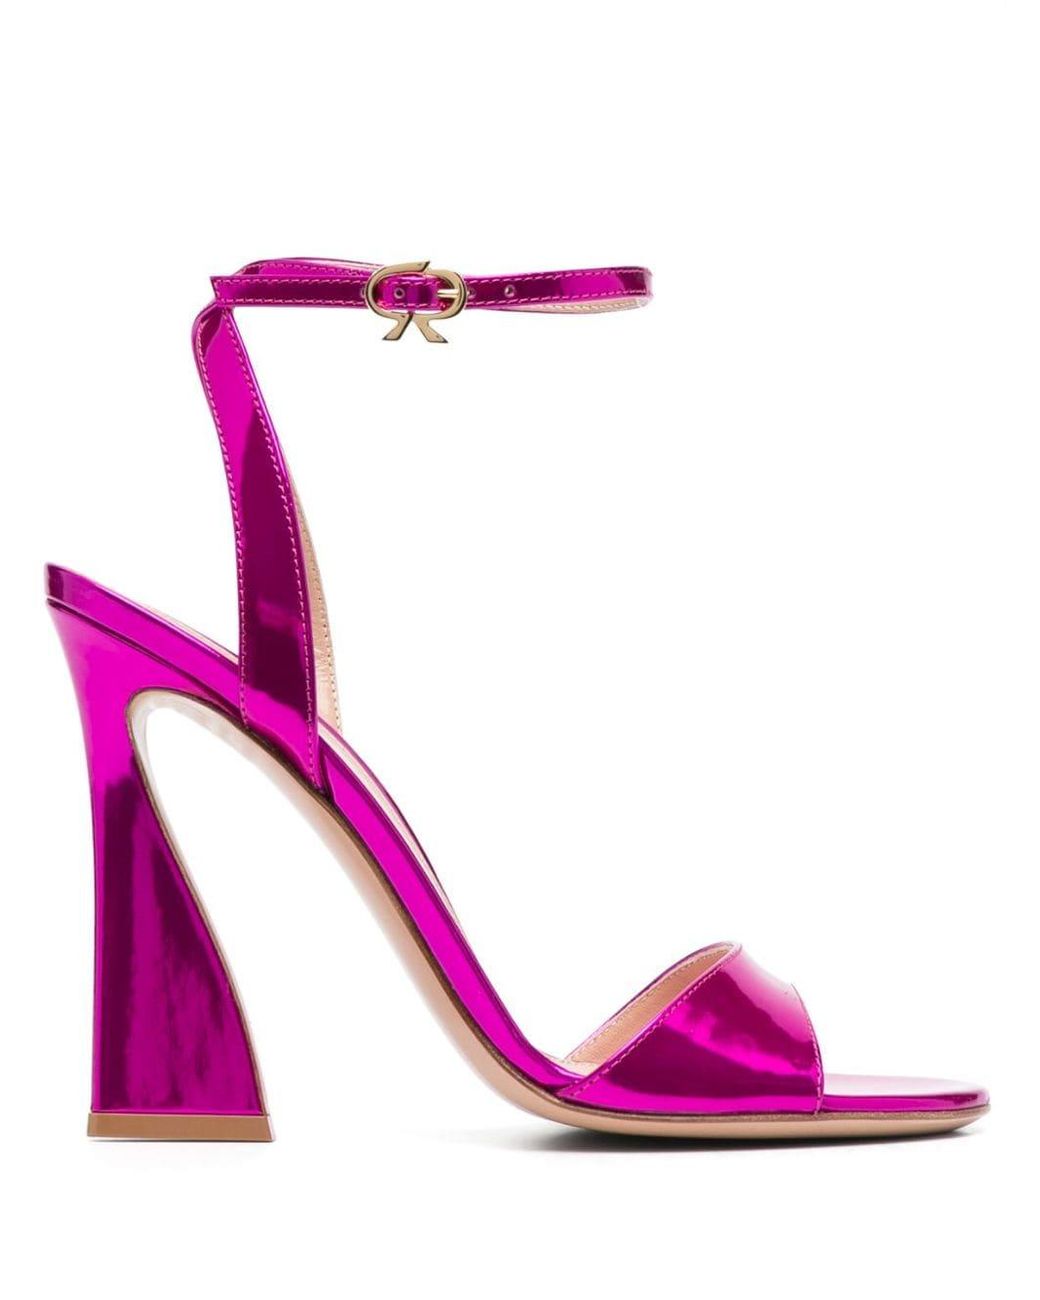 Gianvito Rossi 110mm Curved-heel Sandals in Pink | Lyst